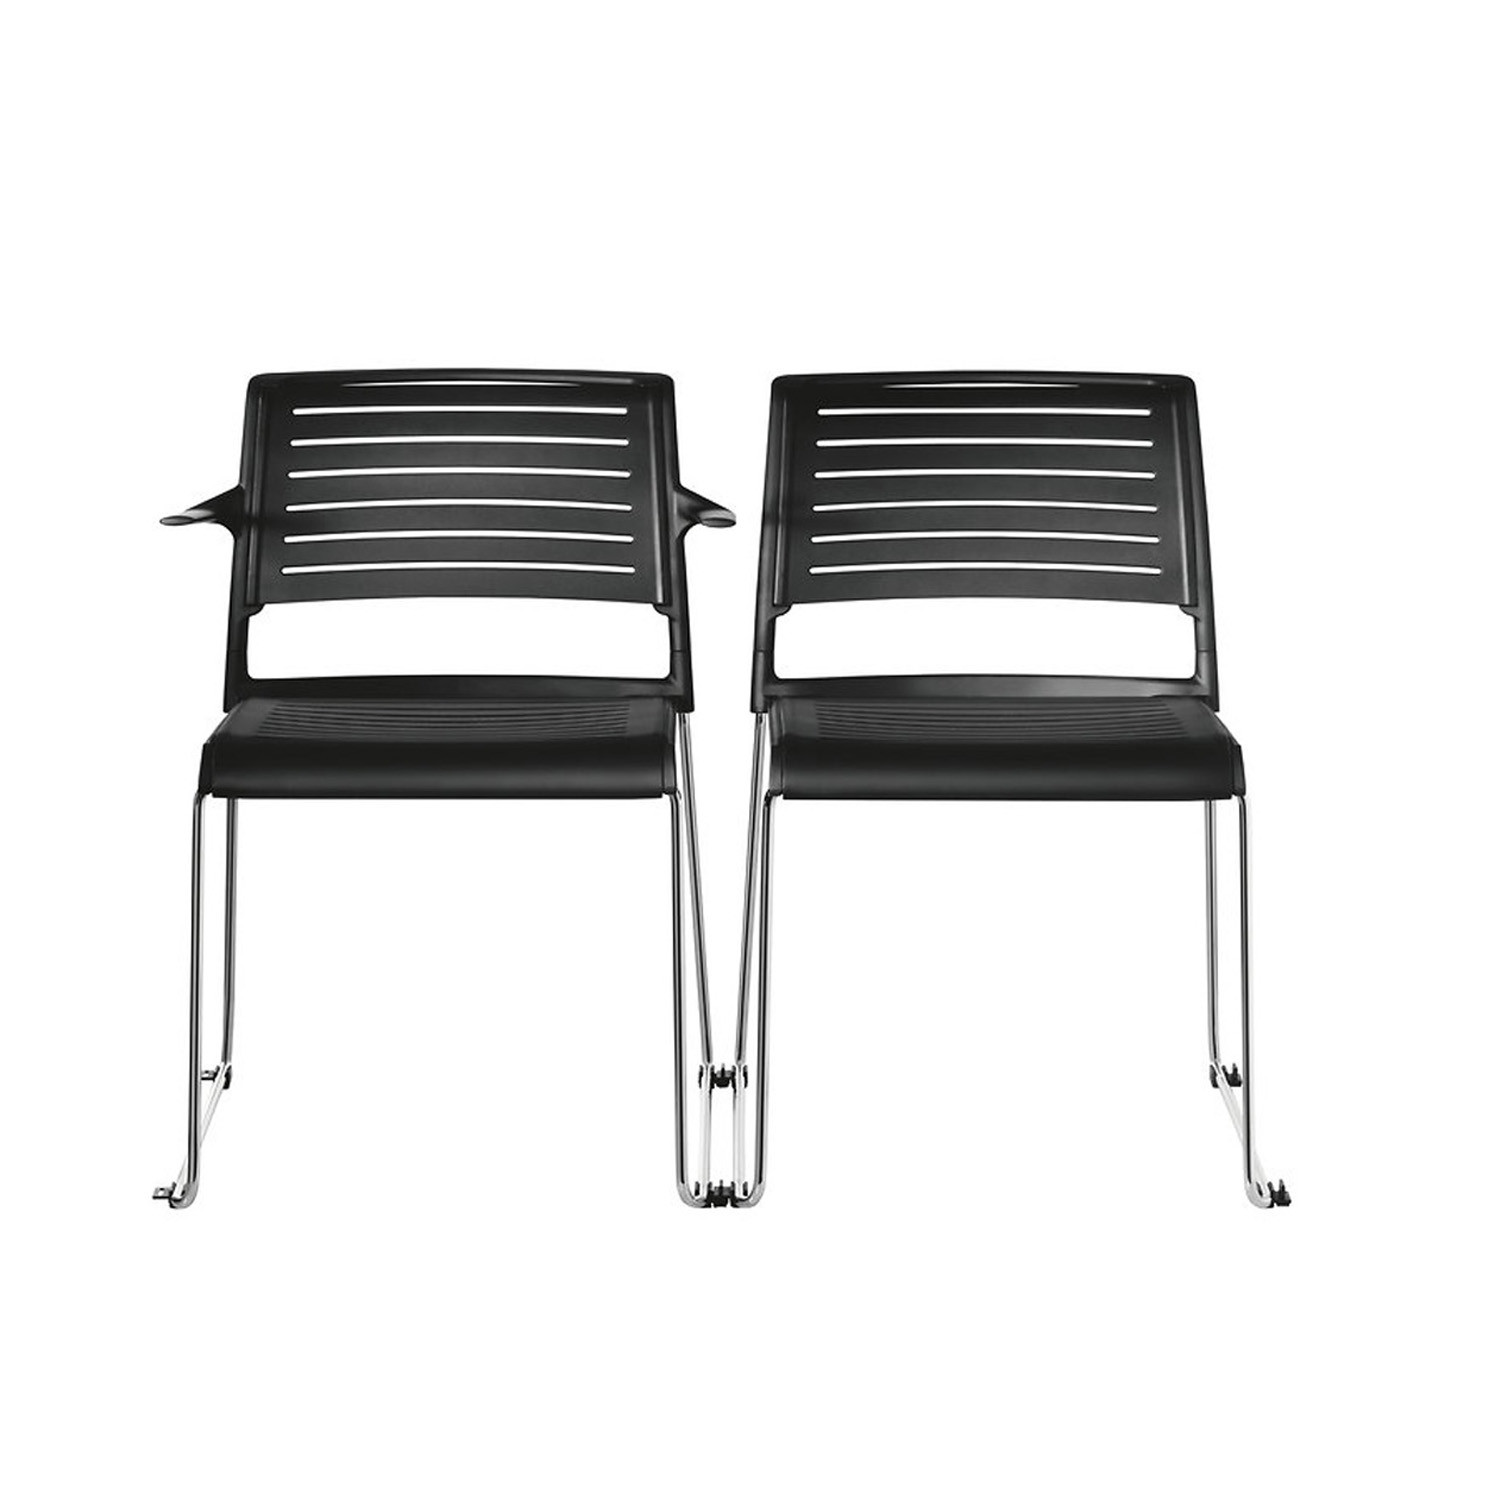 Aline-S Chairs with and without armrest